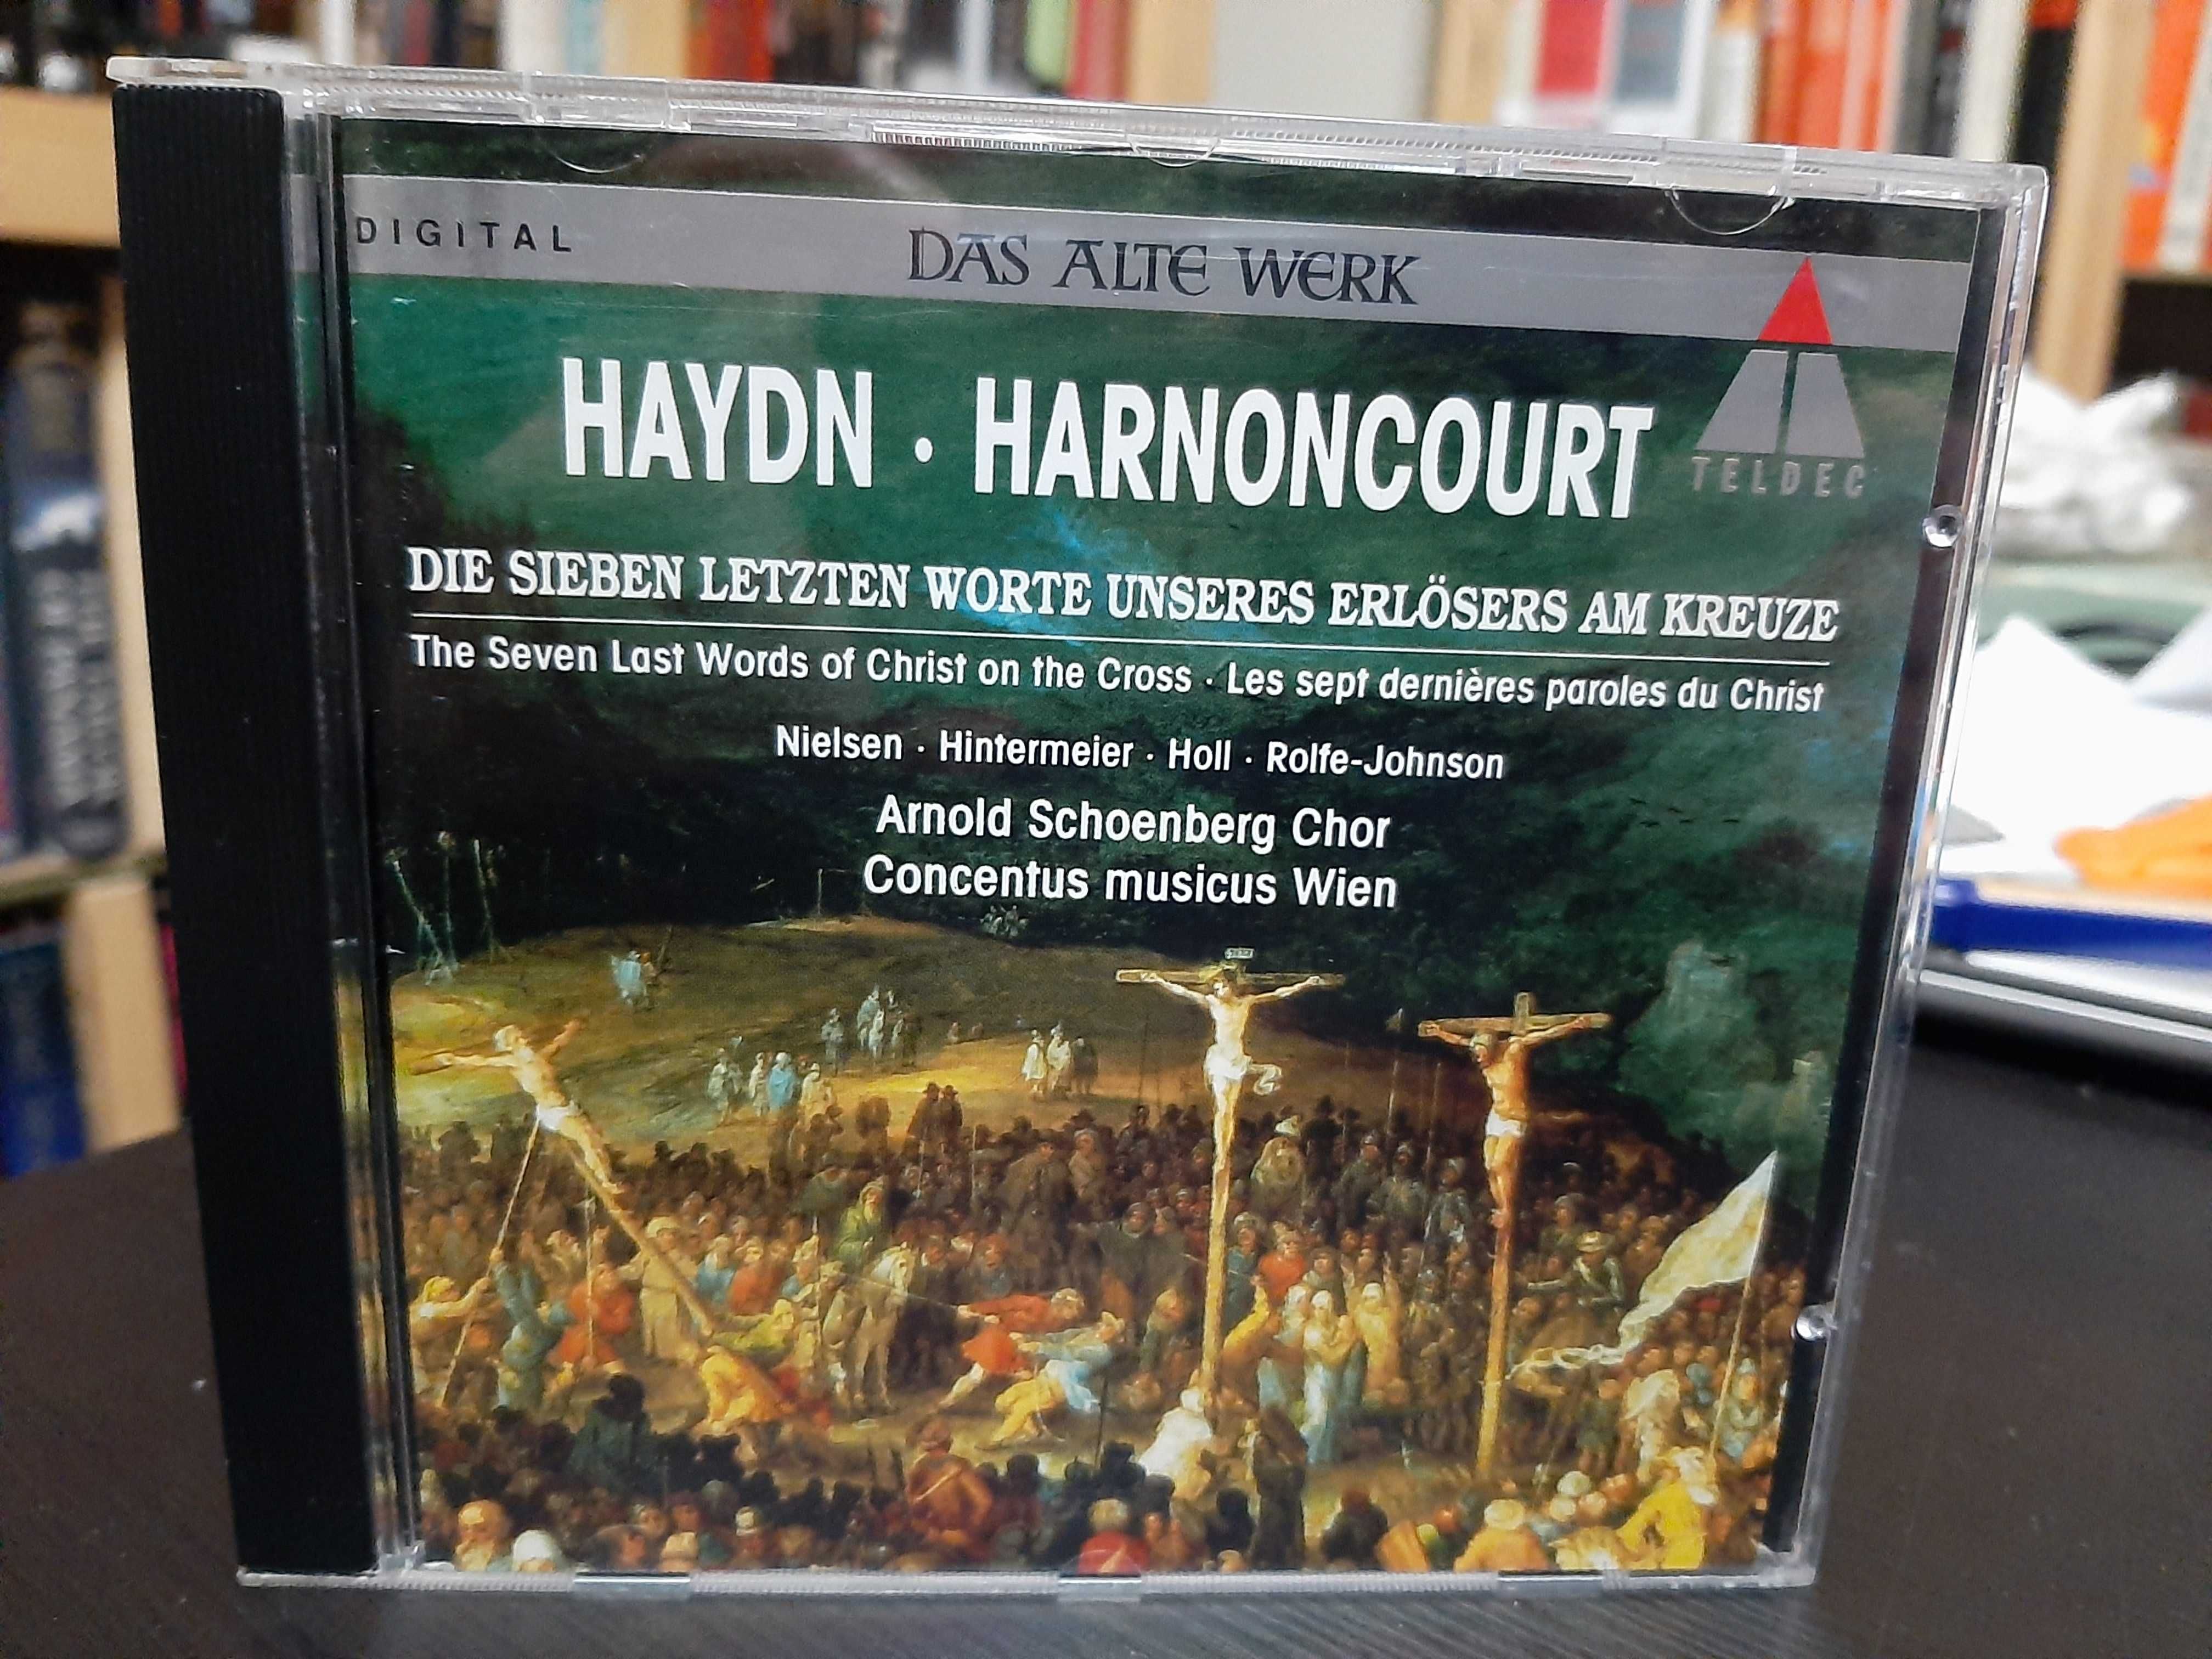 Haydn - The Seven Last Words of Christ on the Cross - Harnoncourt